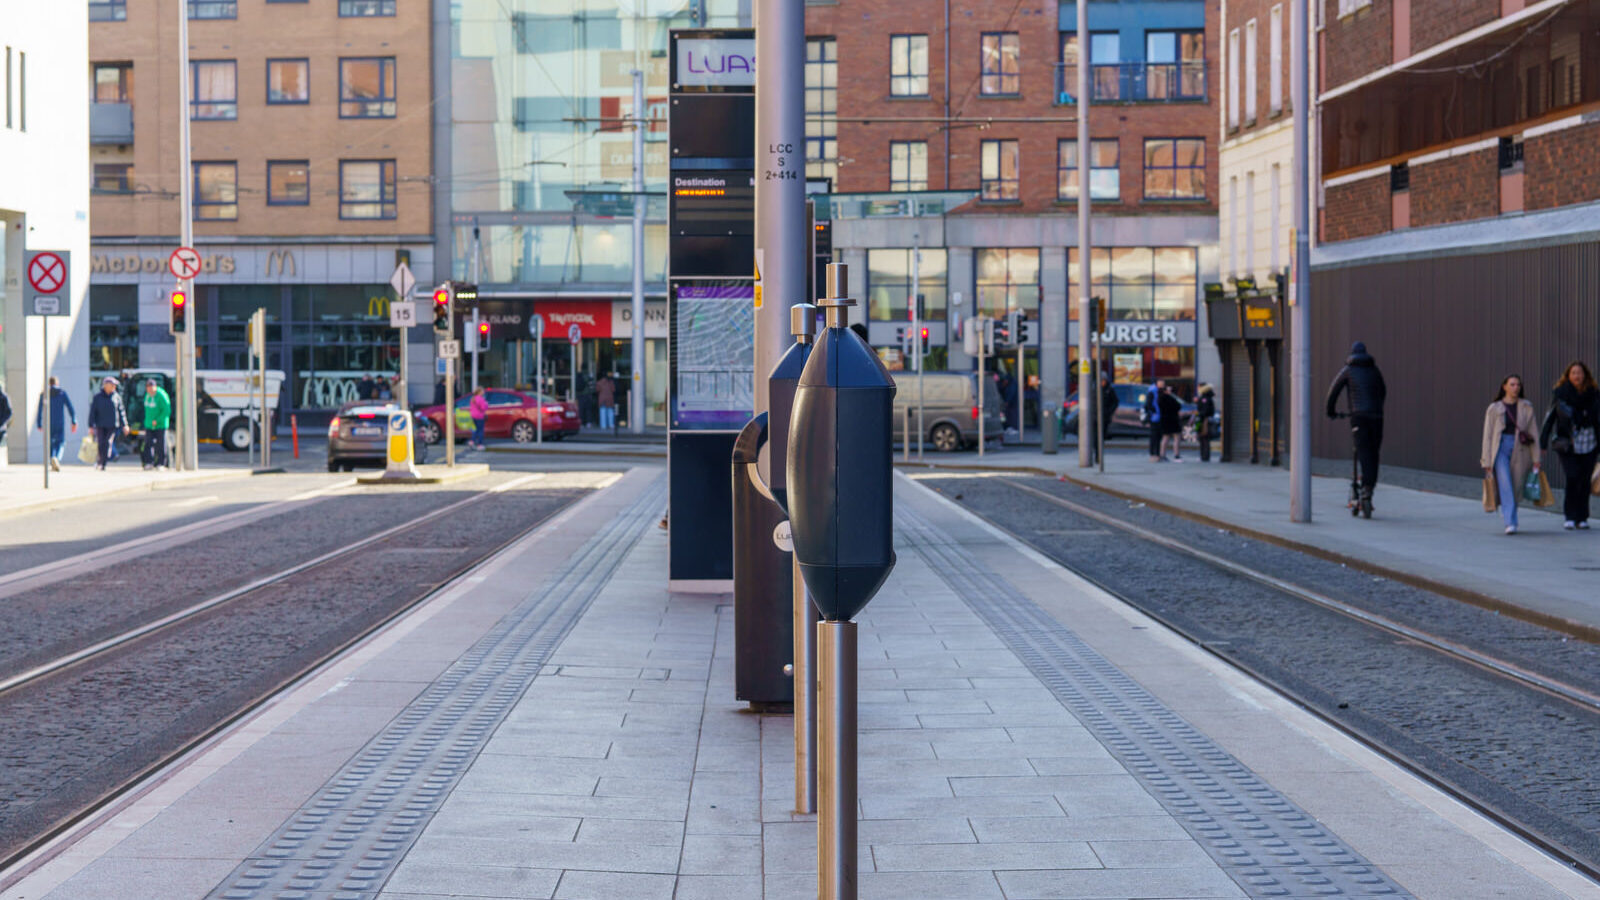 LUAS TRAM STOP AT LOWER DOMINICK STREET [AT THE MOMENT THE AREA DOES FEEL SAFER]-228695-1